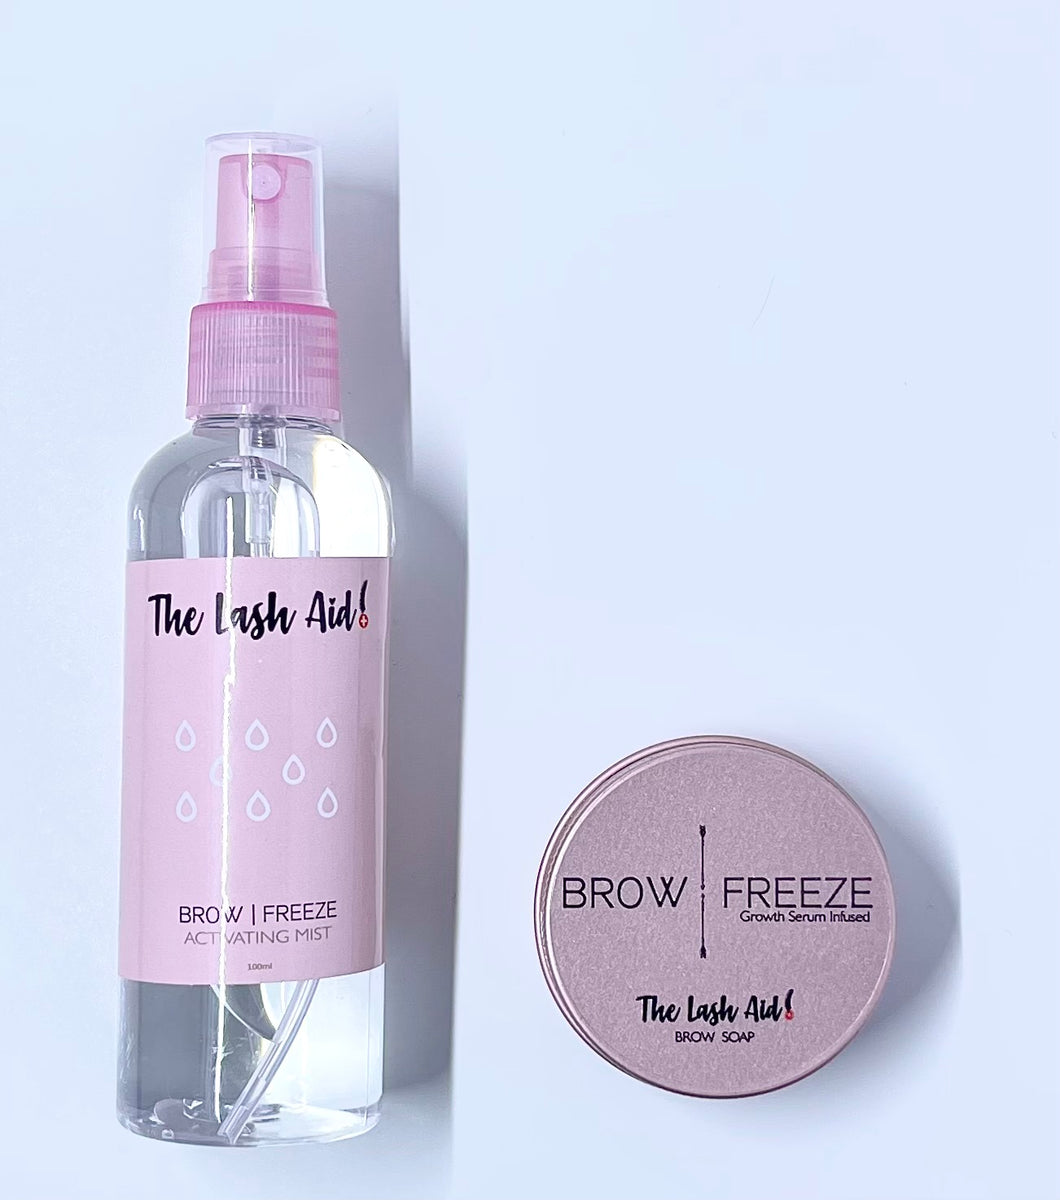 BROWFREEZE- Brow Soap with growth serum infused + hydrating mist spray